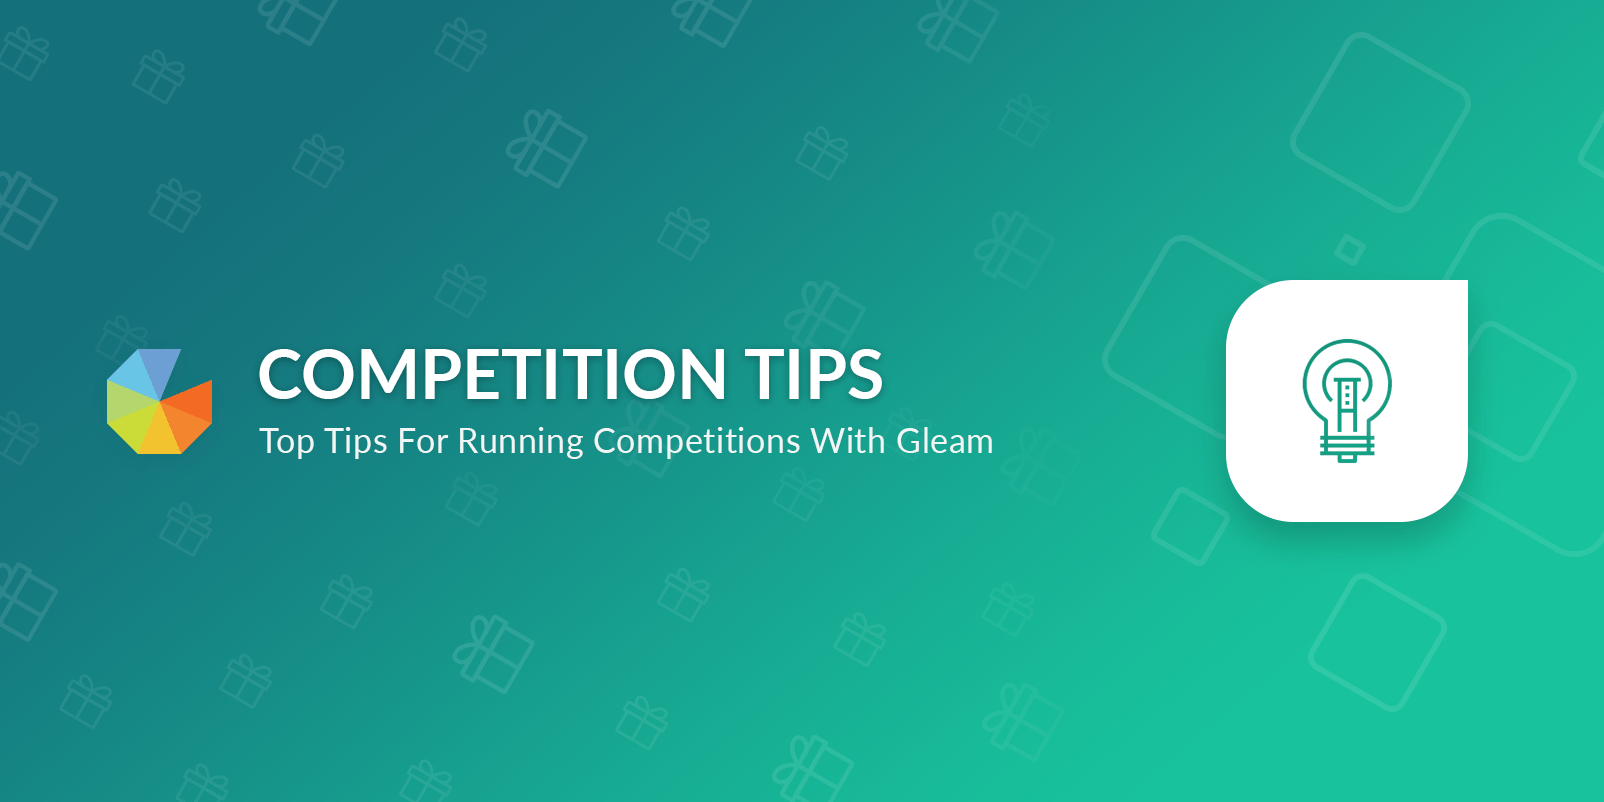 Competition tips, top tips for running competitions with Gleam